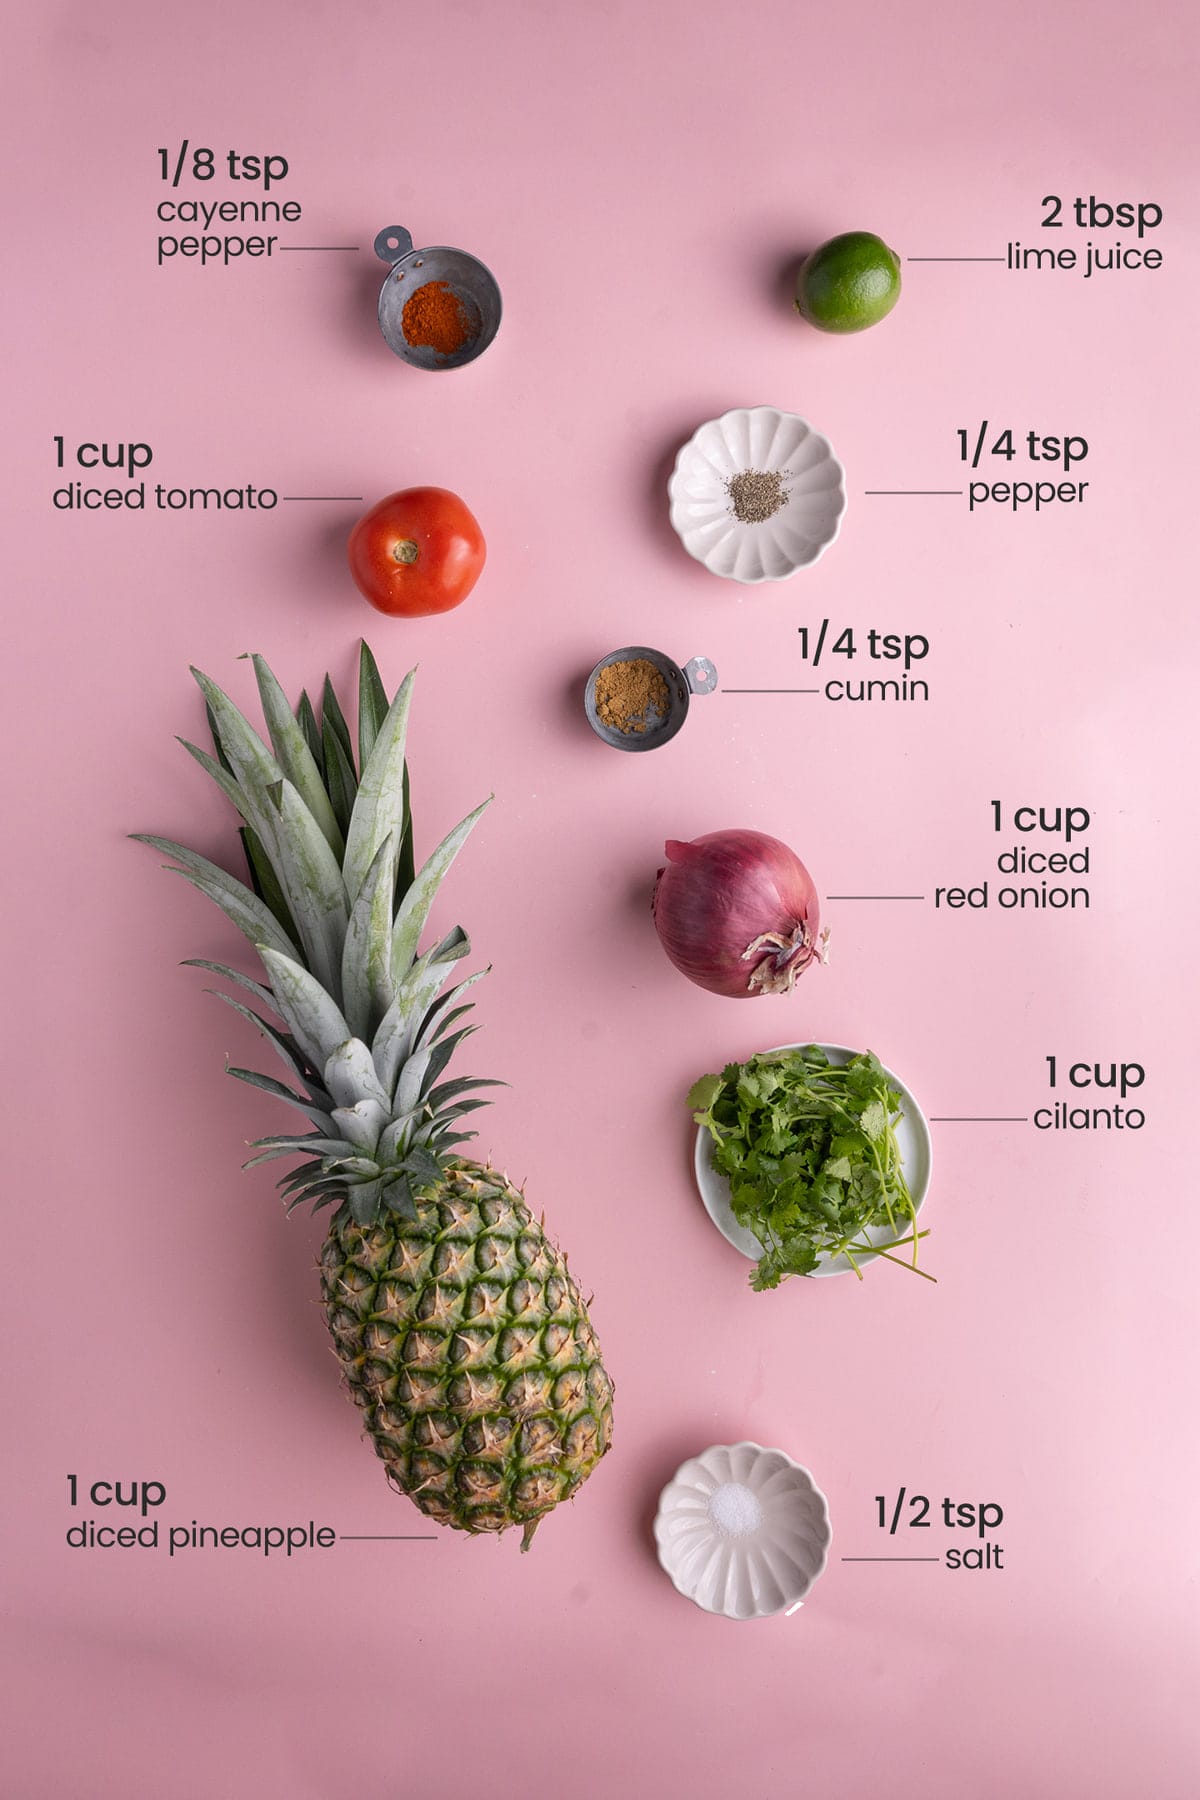 ingredients for pineapple pico de gallo - cayenne pepper, lime juice, diced tomato, pepper, cumin, diced red onion, cilantro, salt, pineapple